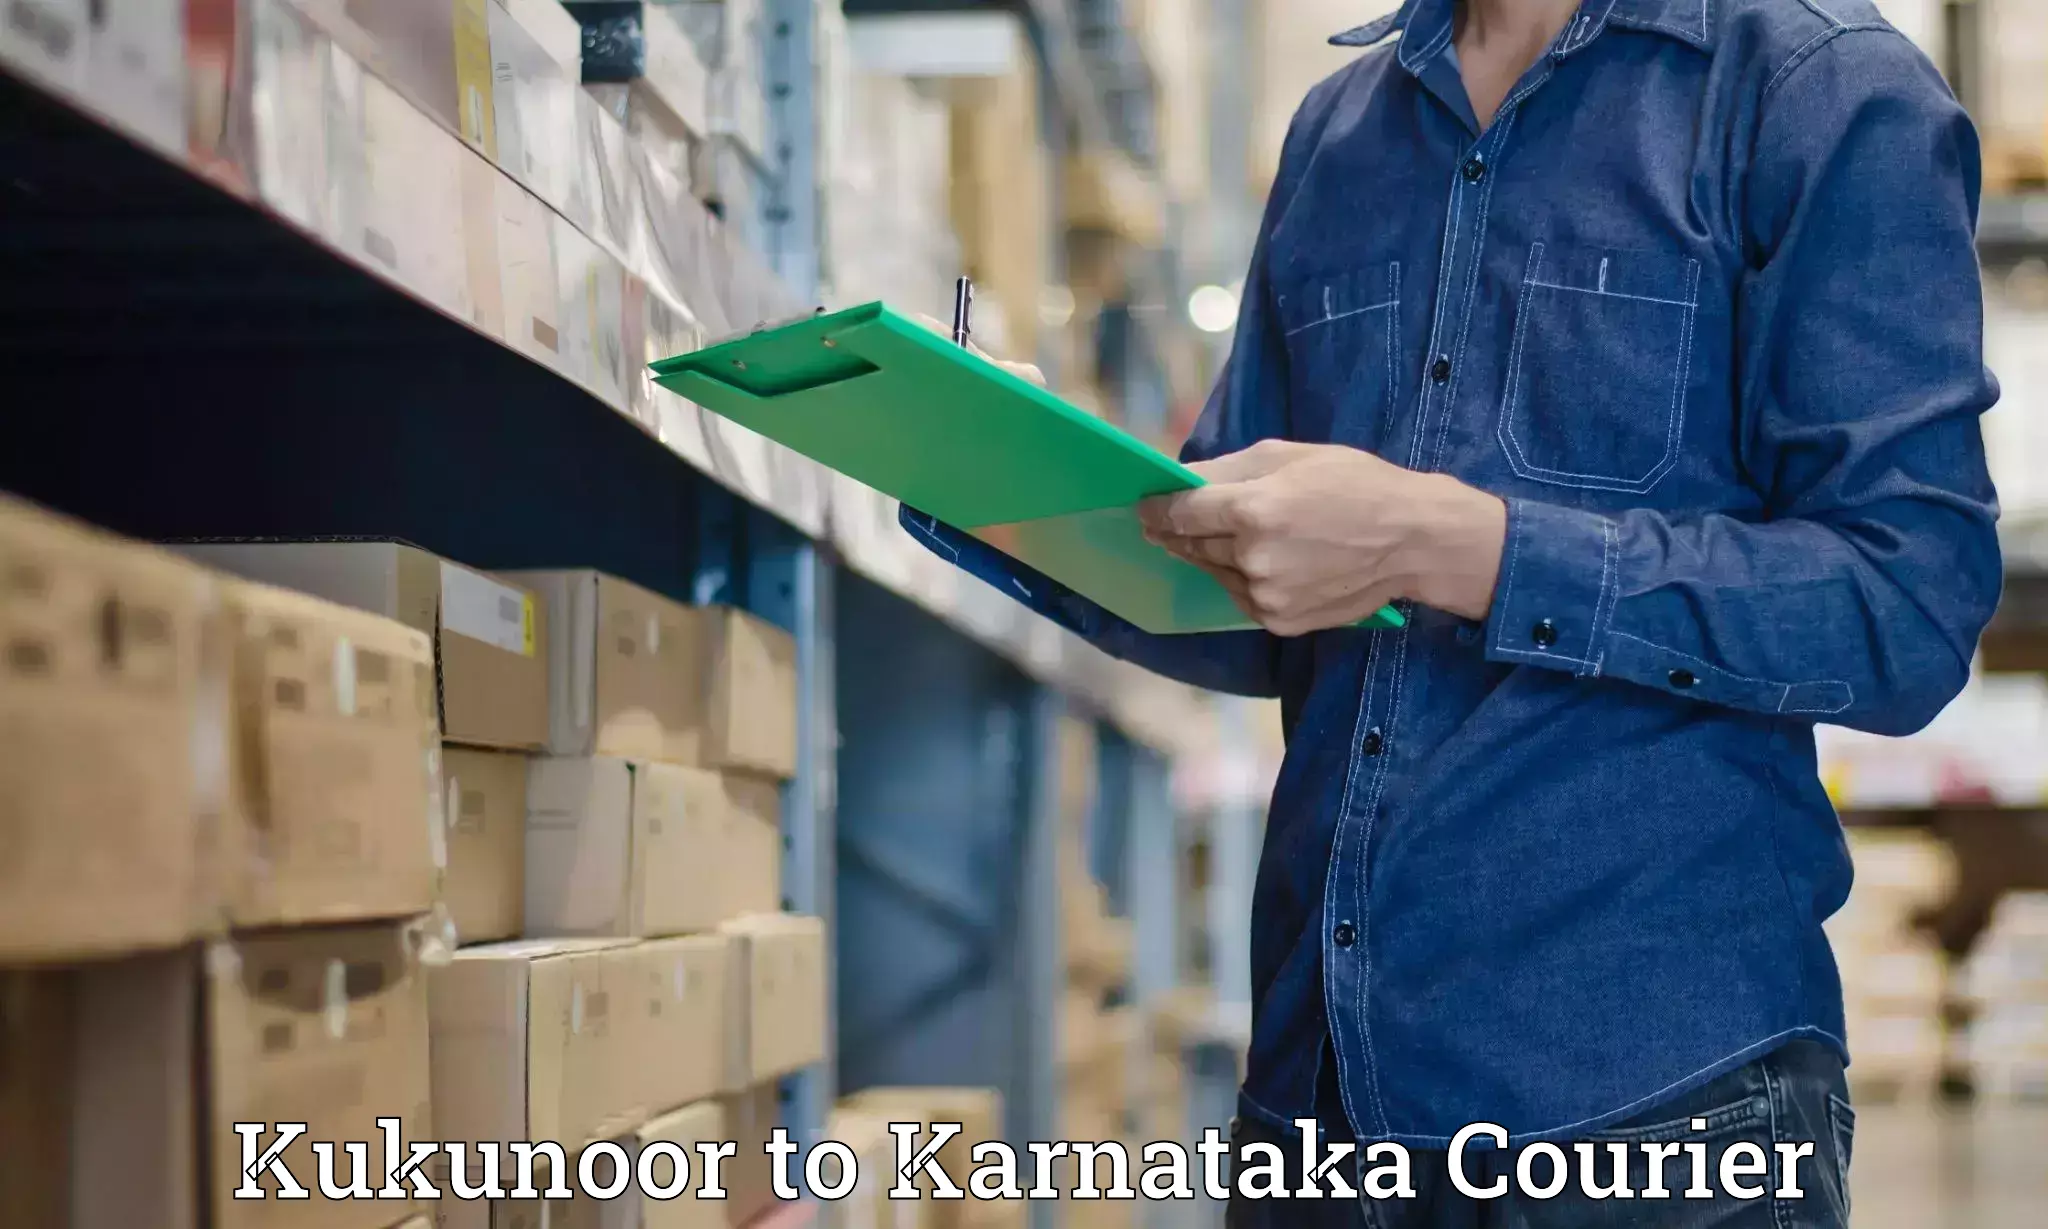 Reliable delivery network Kukunoor to Bailhongal